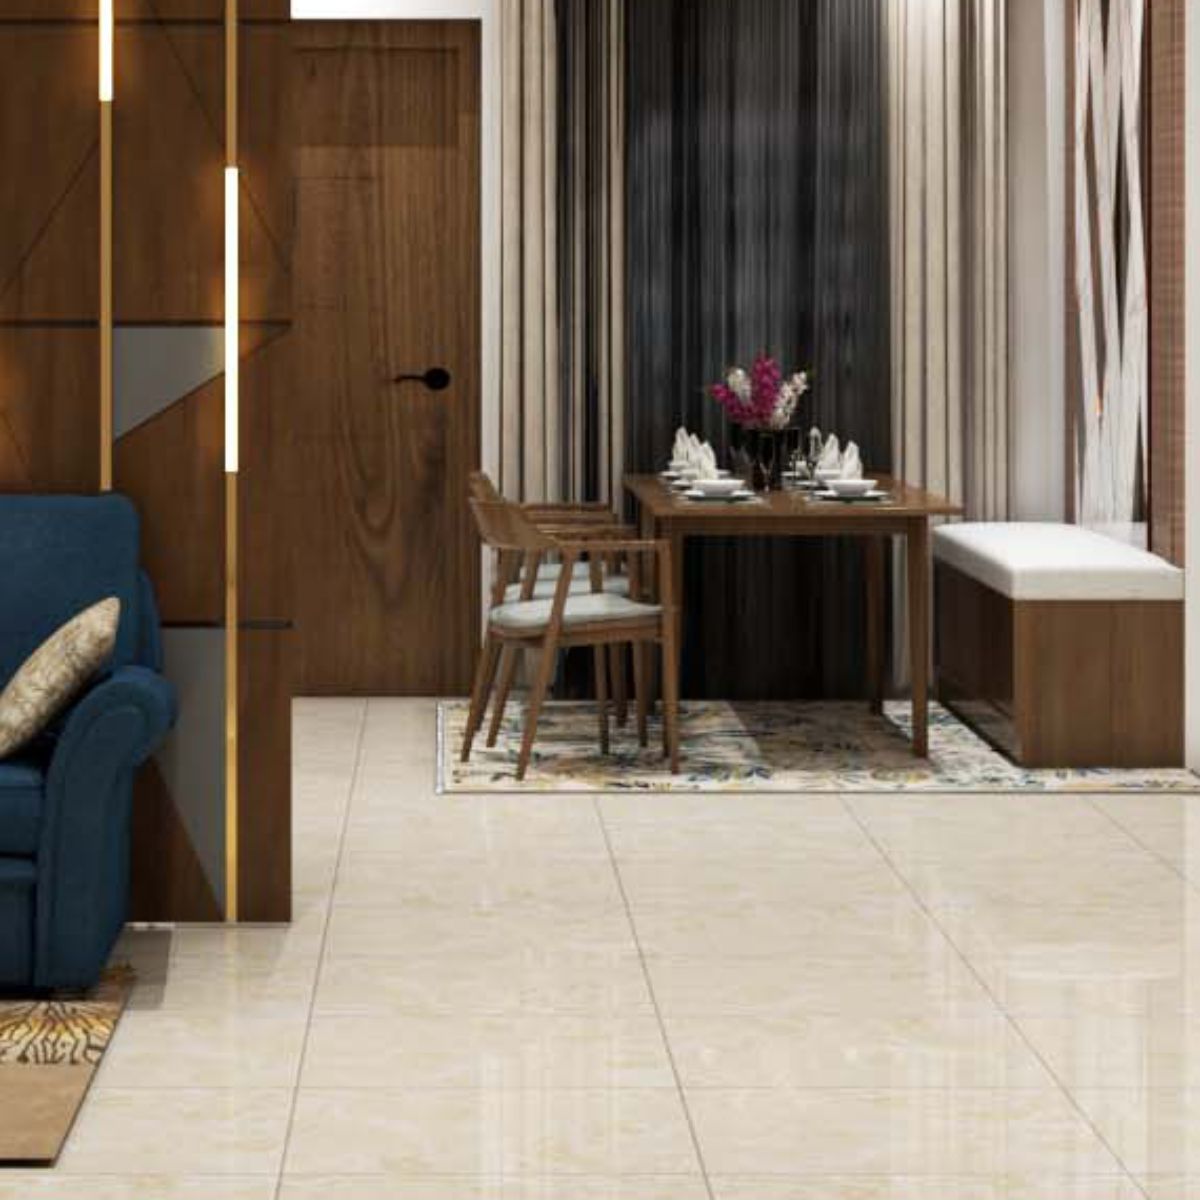 Ceramic Floor Tiles Design With A Glossy Finish